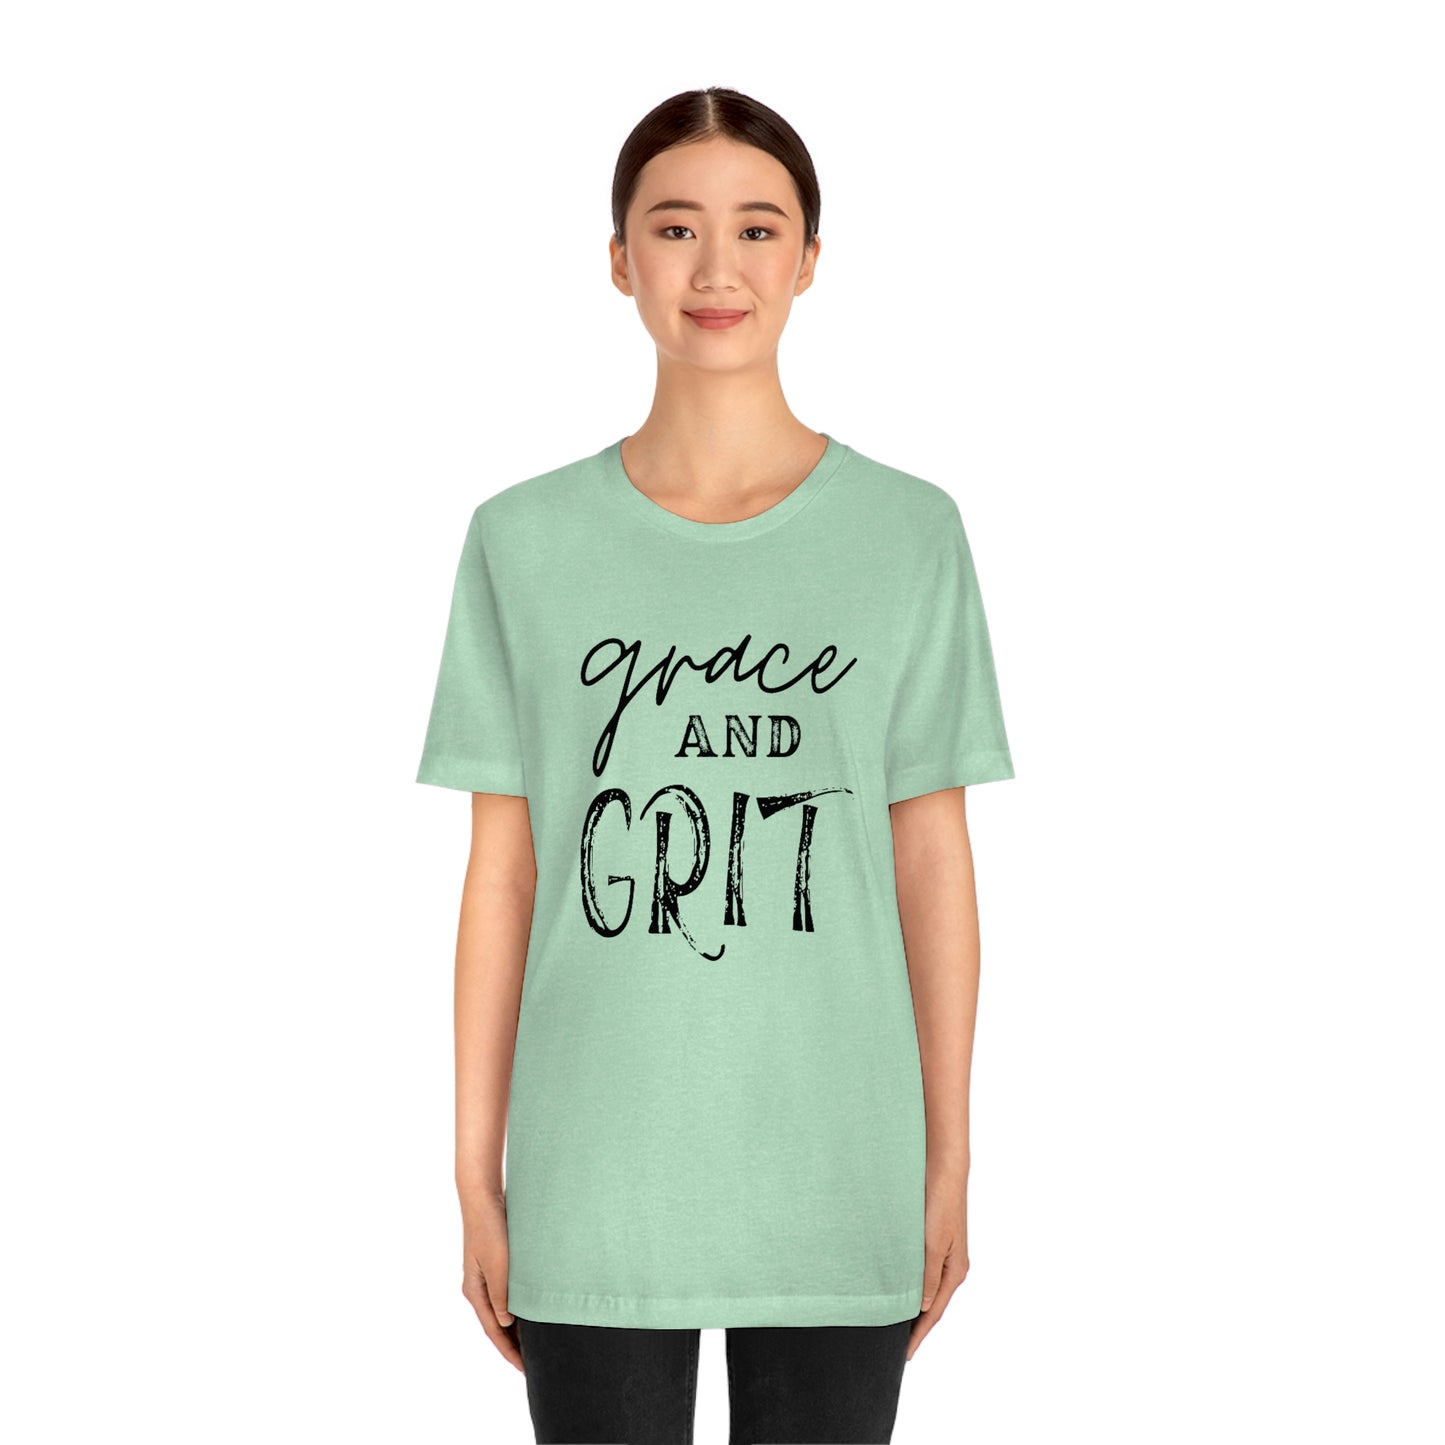 "Grace and Grit" Unisex Jersey Short Tee